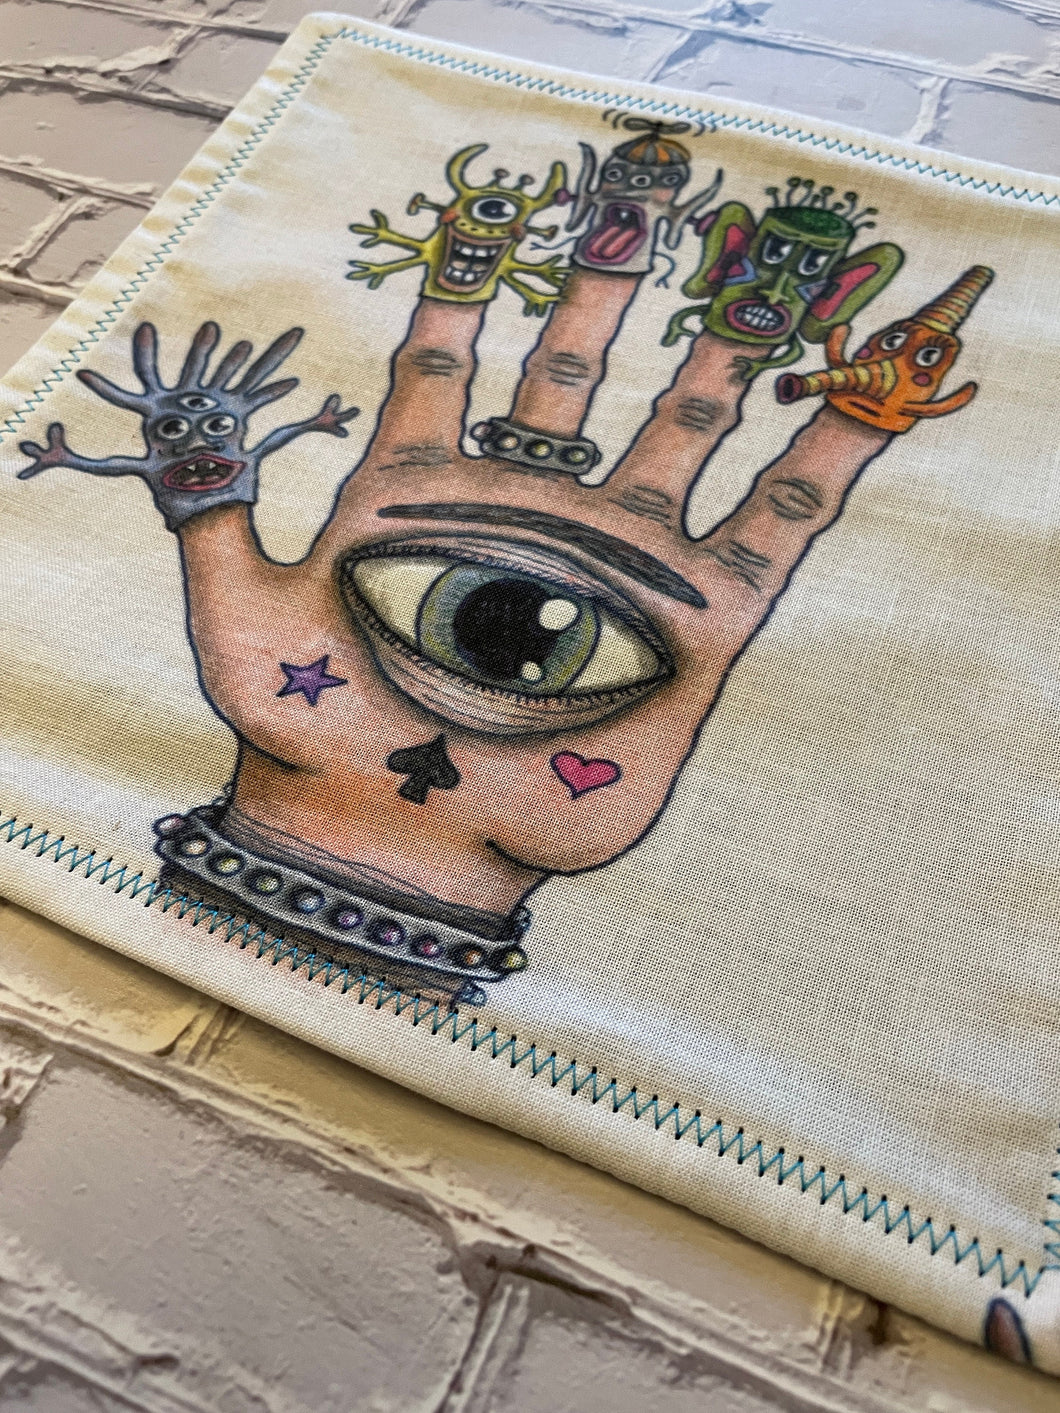 EDC Hank Limited Edition | EDC Gear Hankerchief | Hank for Bag, Pouch, Or Tray | Finger Puppet Third Eye |  Everyday Carry Handkerchief